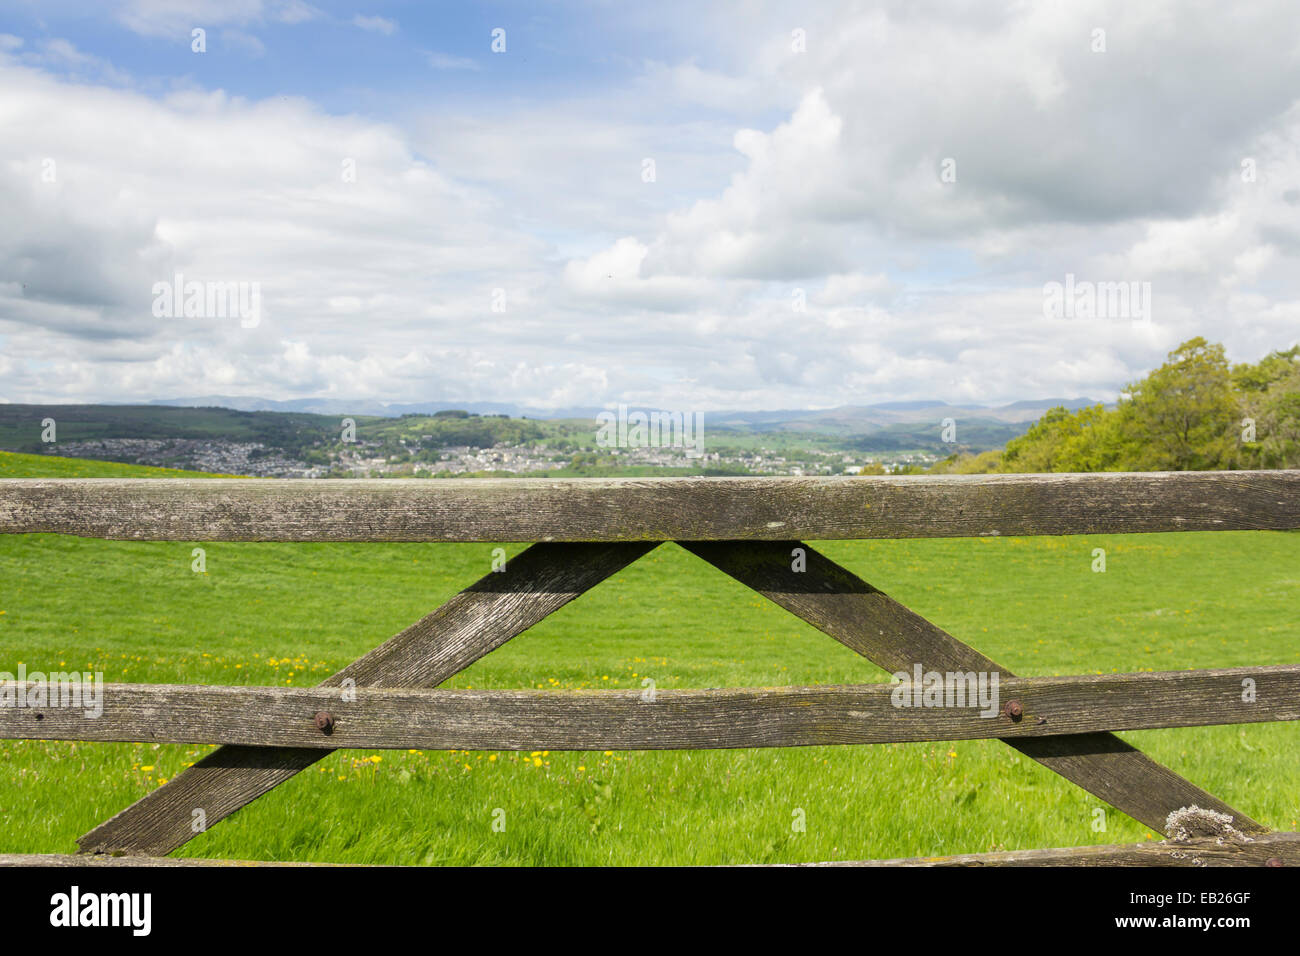 Five barred field gate and meadow overlooking the town of Kendal in England's Lake District Stock Photo